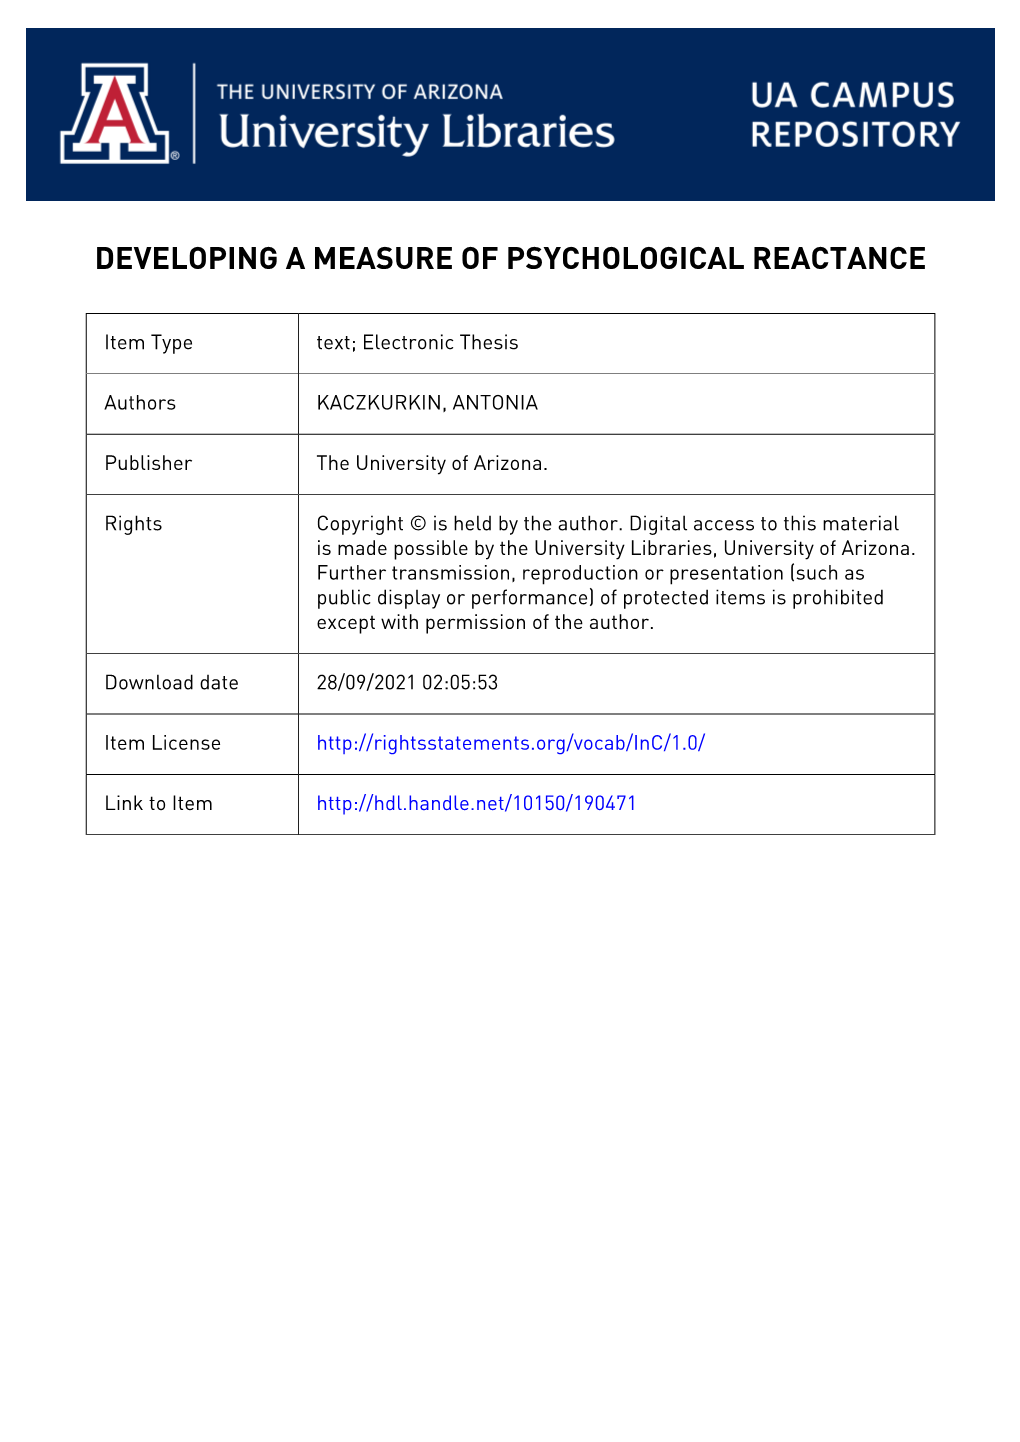 Developing a State Measure of Psychological Reactance